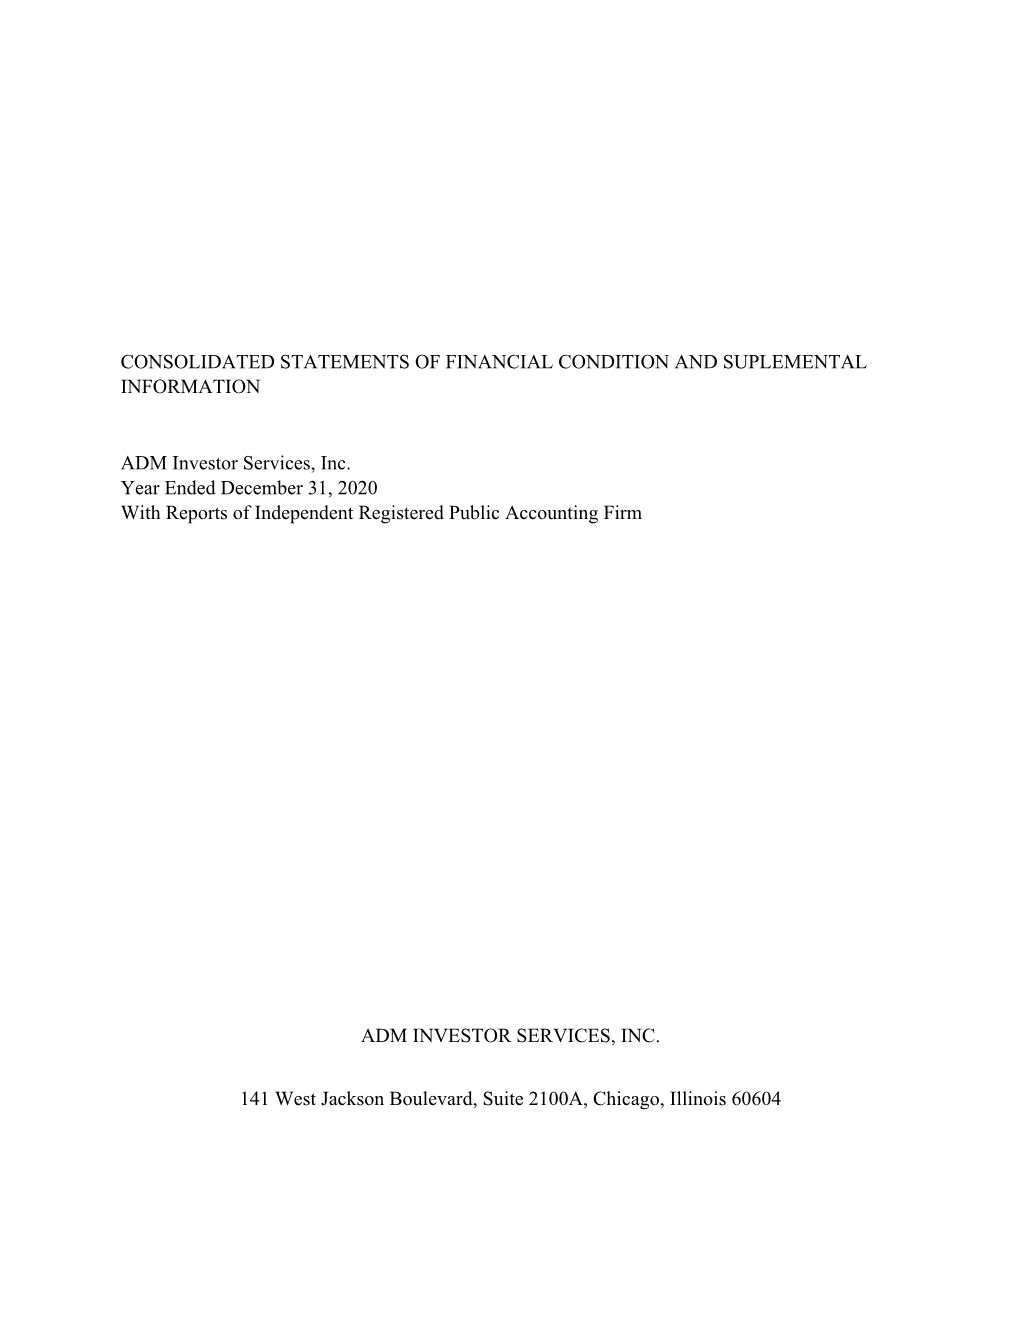 Consolidated Statements of Financial Condition and Suplemental Information